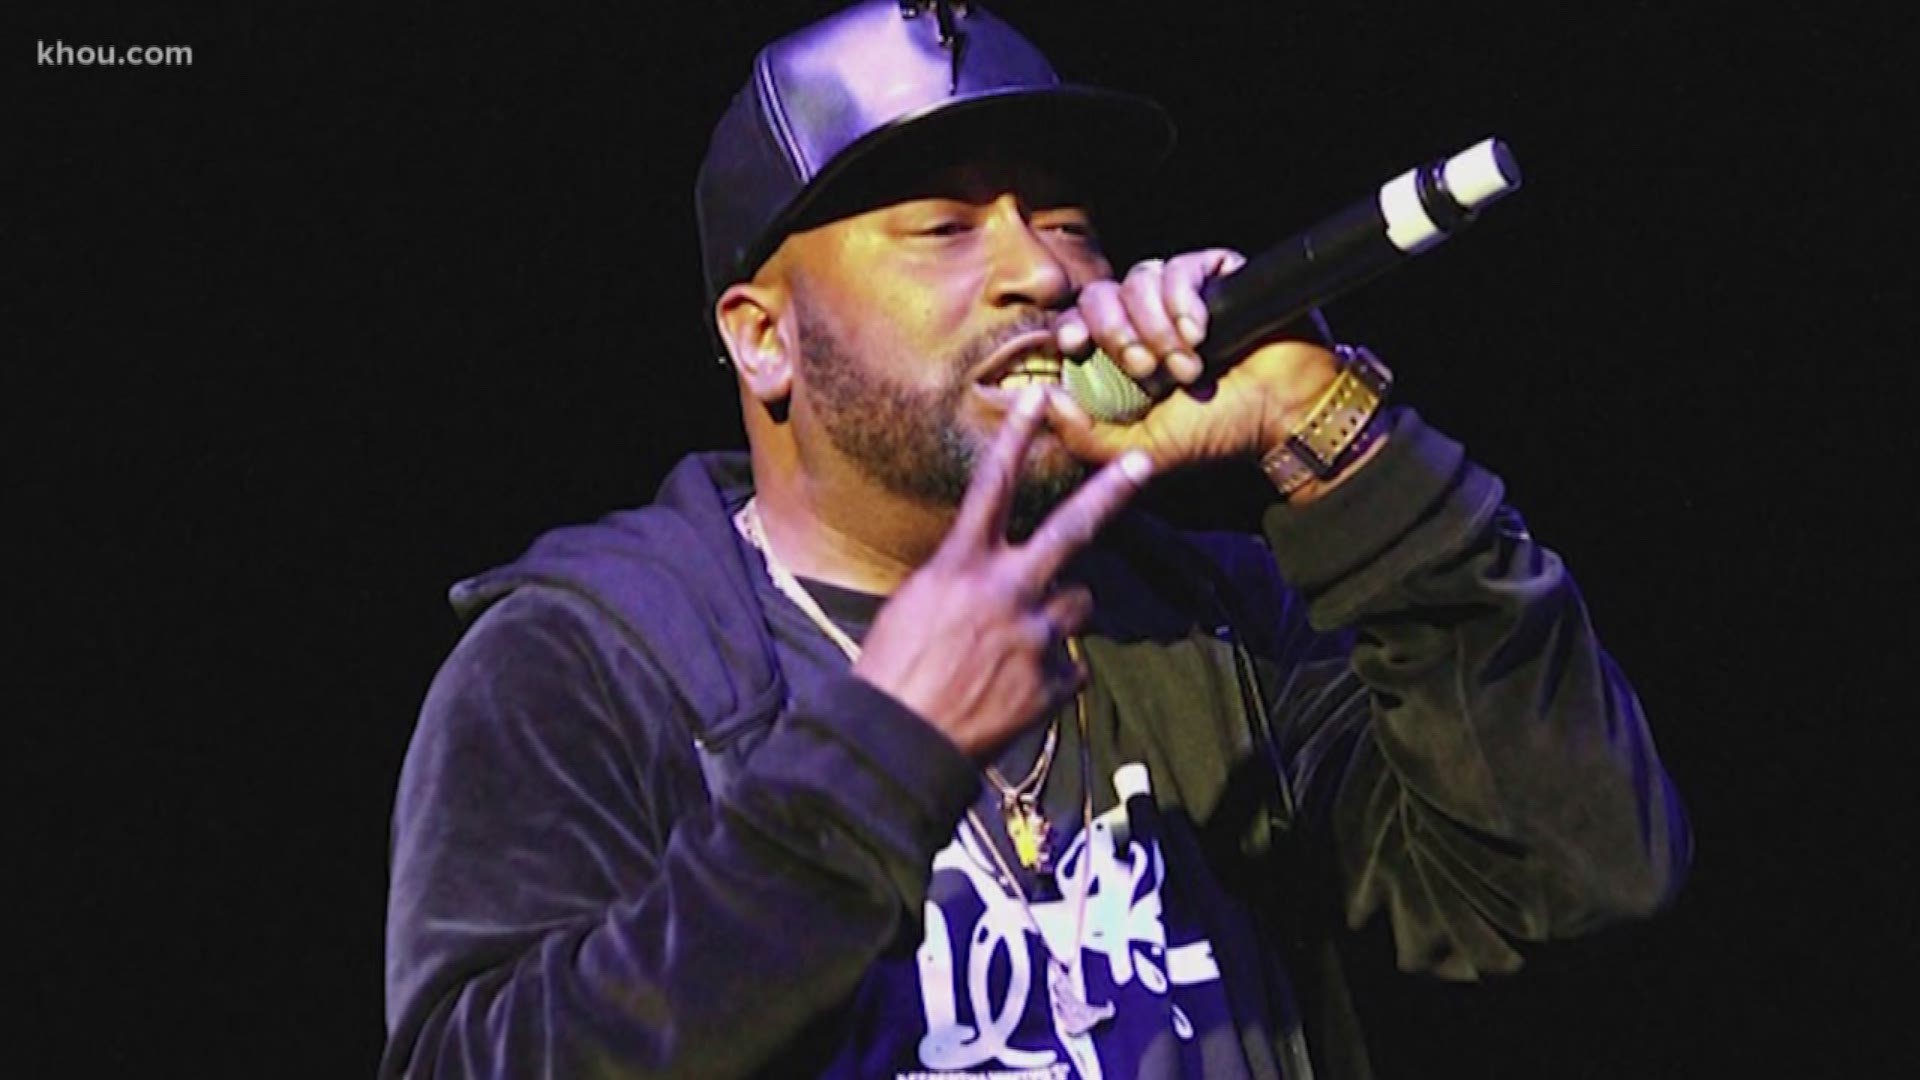 Grammy-nominated rapper -- and Houston icon -- Bun B shot a robber at his home Tuesday night, Houston police say.

Bun B, whose real name is Bernard Freeman, fired at the masked robber, who had pulled a gun on his wife when she answered the door around 5:45 p.m., police said. 

The robber -- later identified as Demonte Alif Jackson -- forced his way inside and held Queen Freeman at gunpoint, according to attorney Charles Adams.